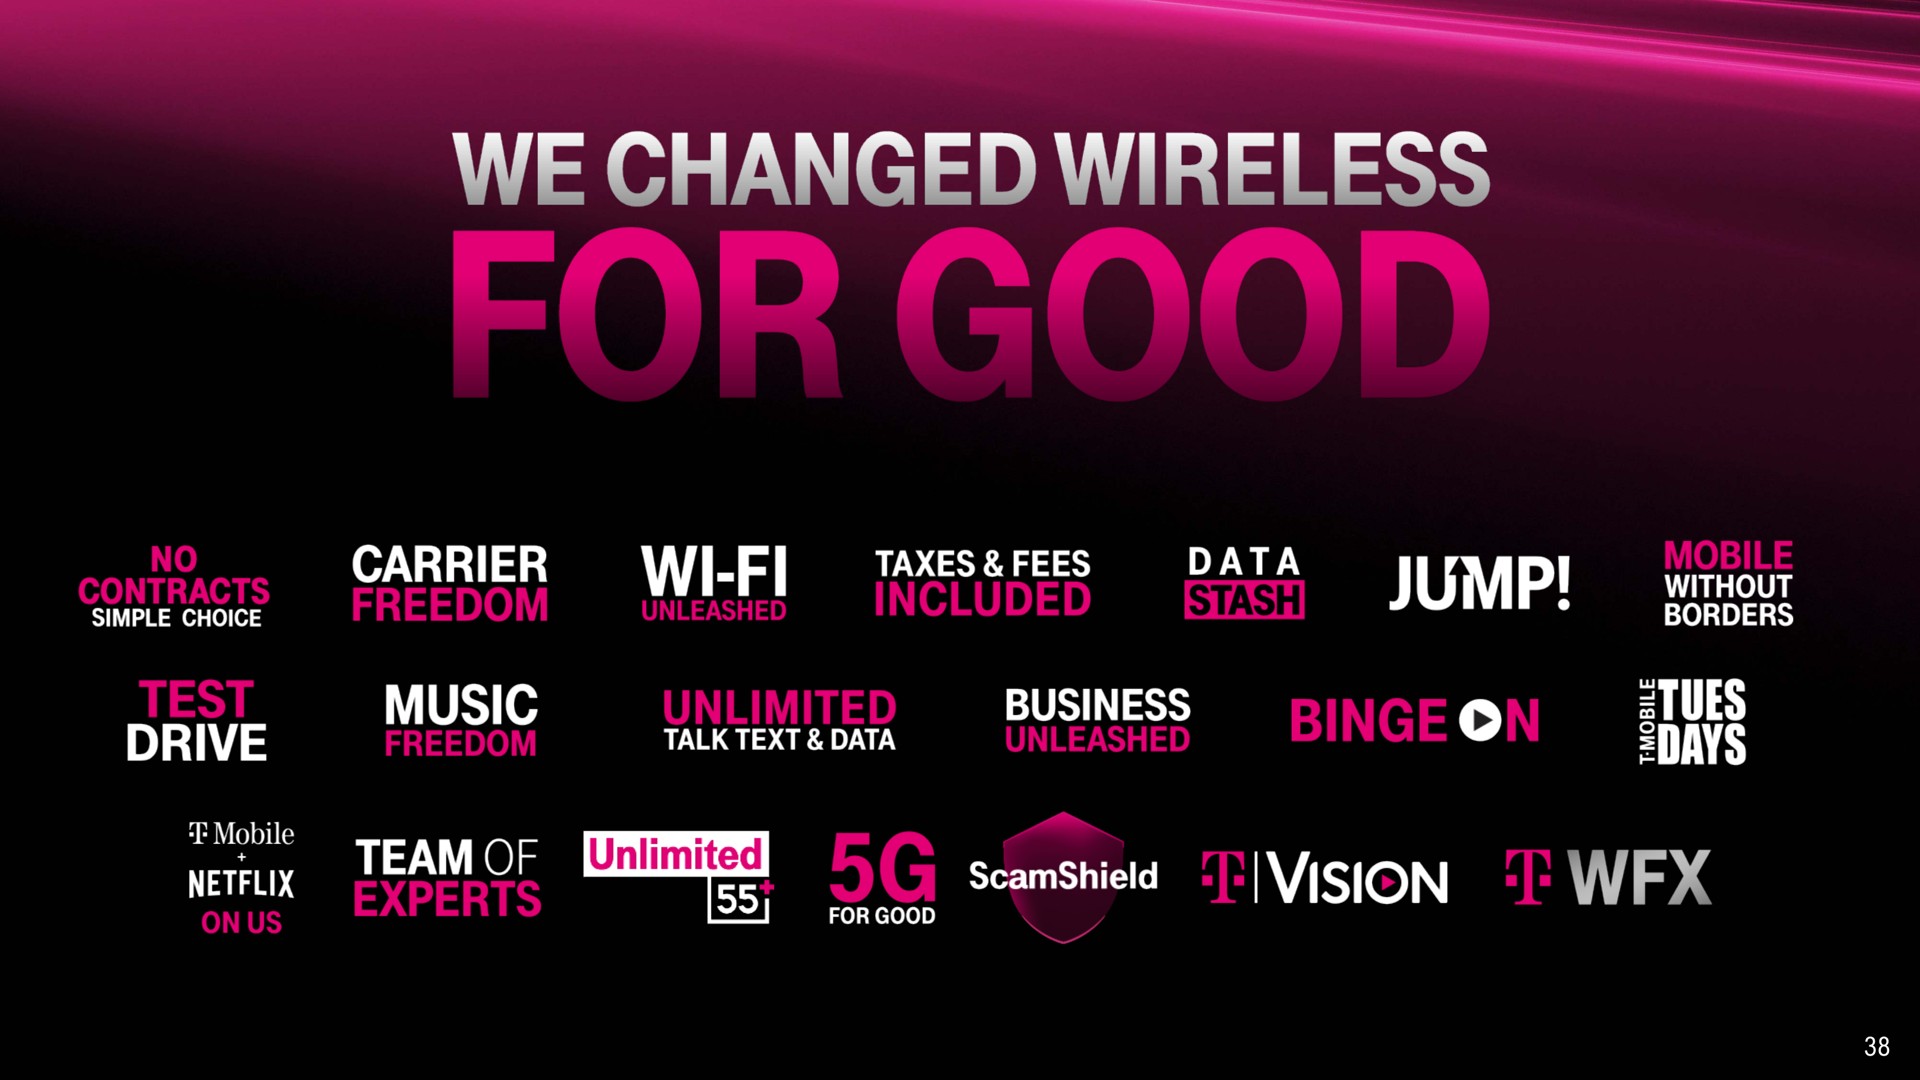 we changed wireless | T-Mobile